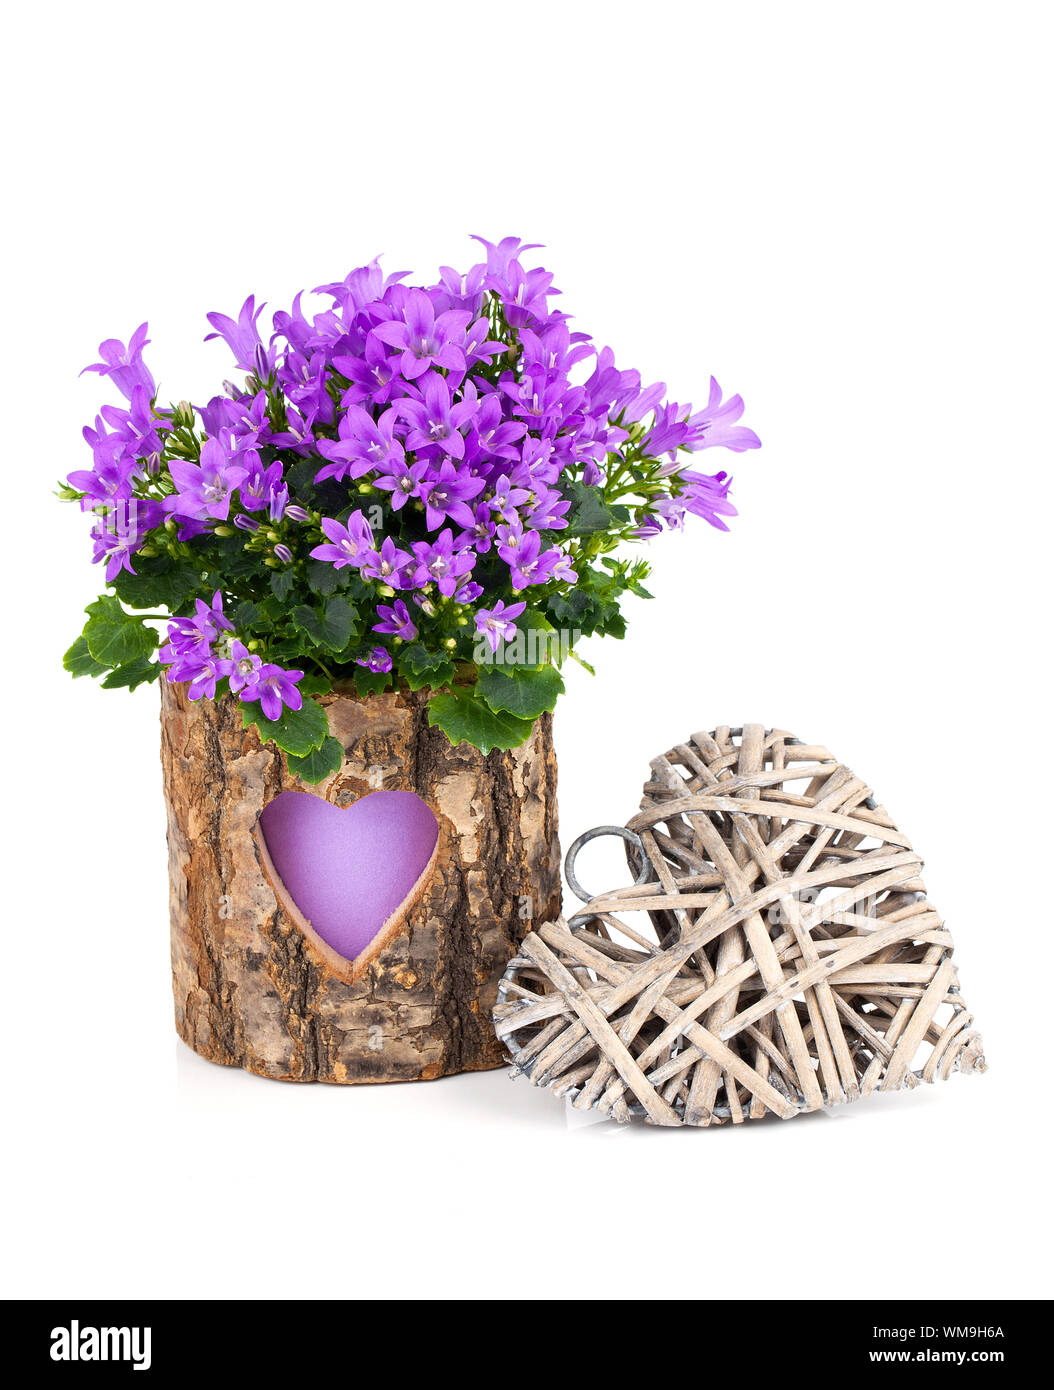 blue campanula flowers for Valentine's Day with wooden heart, on white background Stock Photo